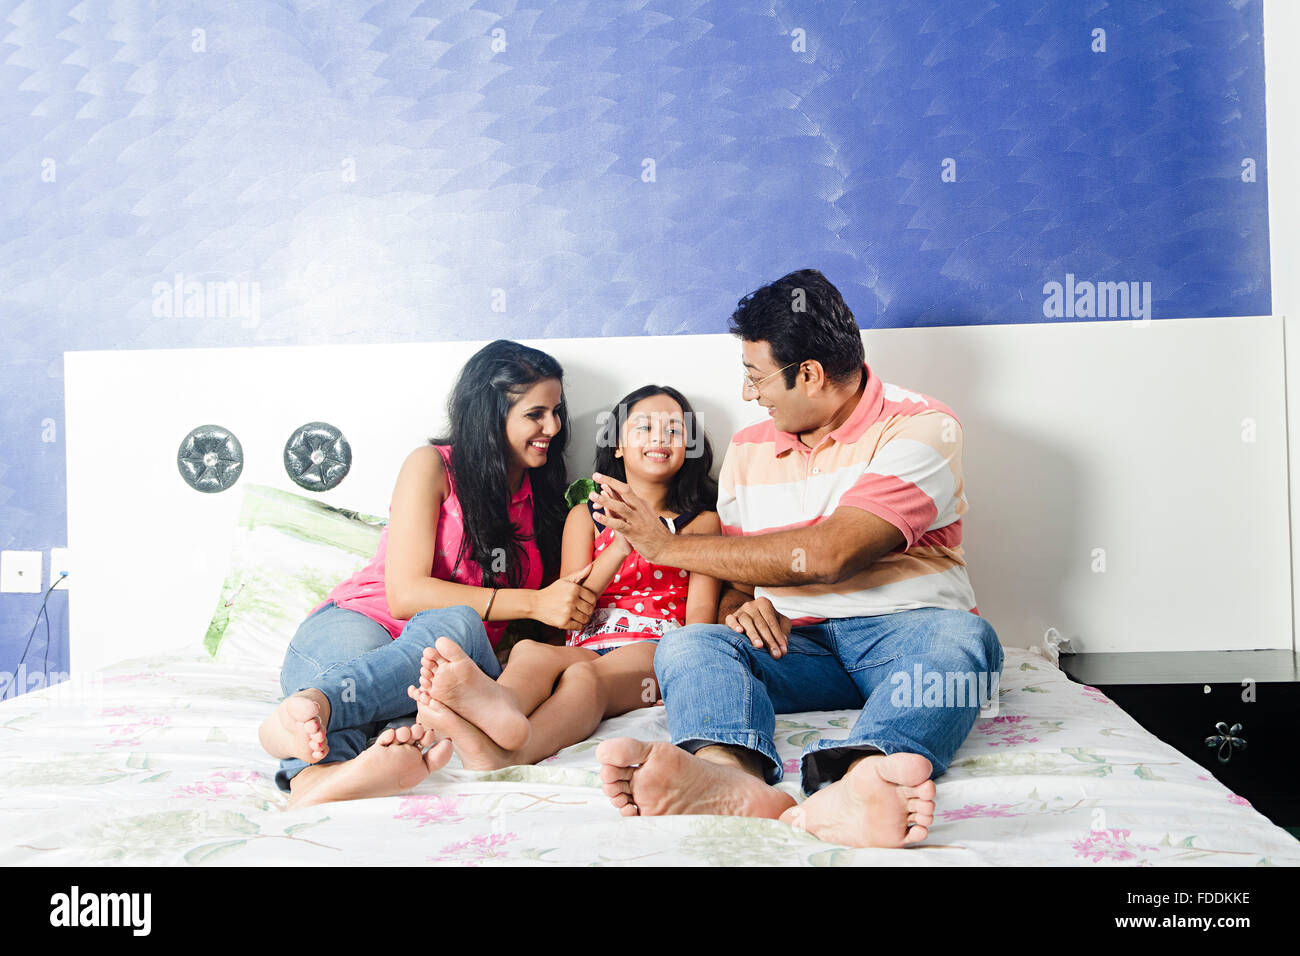 3 People Parents and Kid Daughter Bedroom Sitting Fun Stock Photo